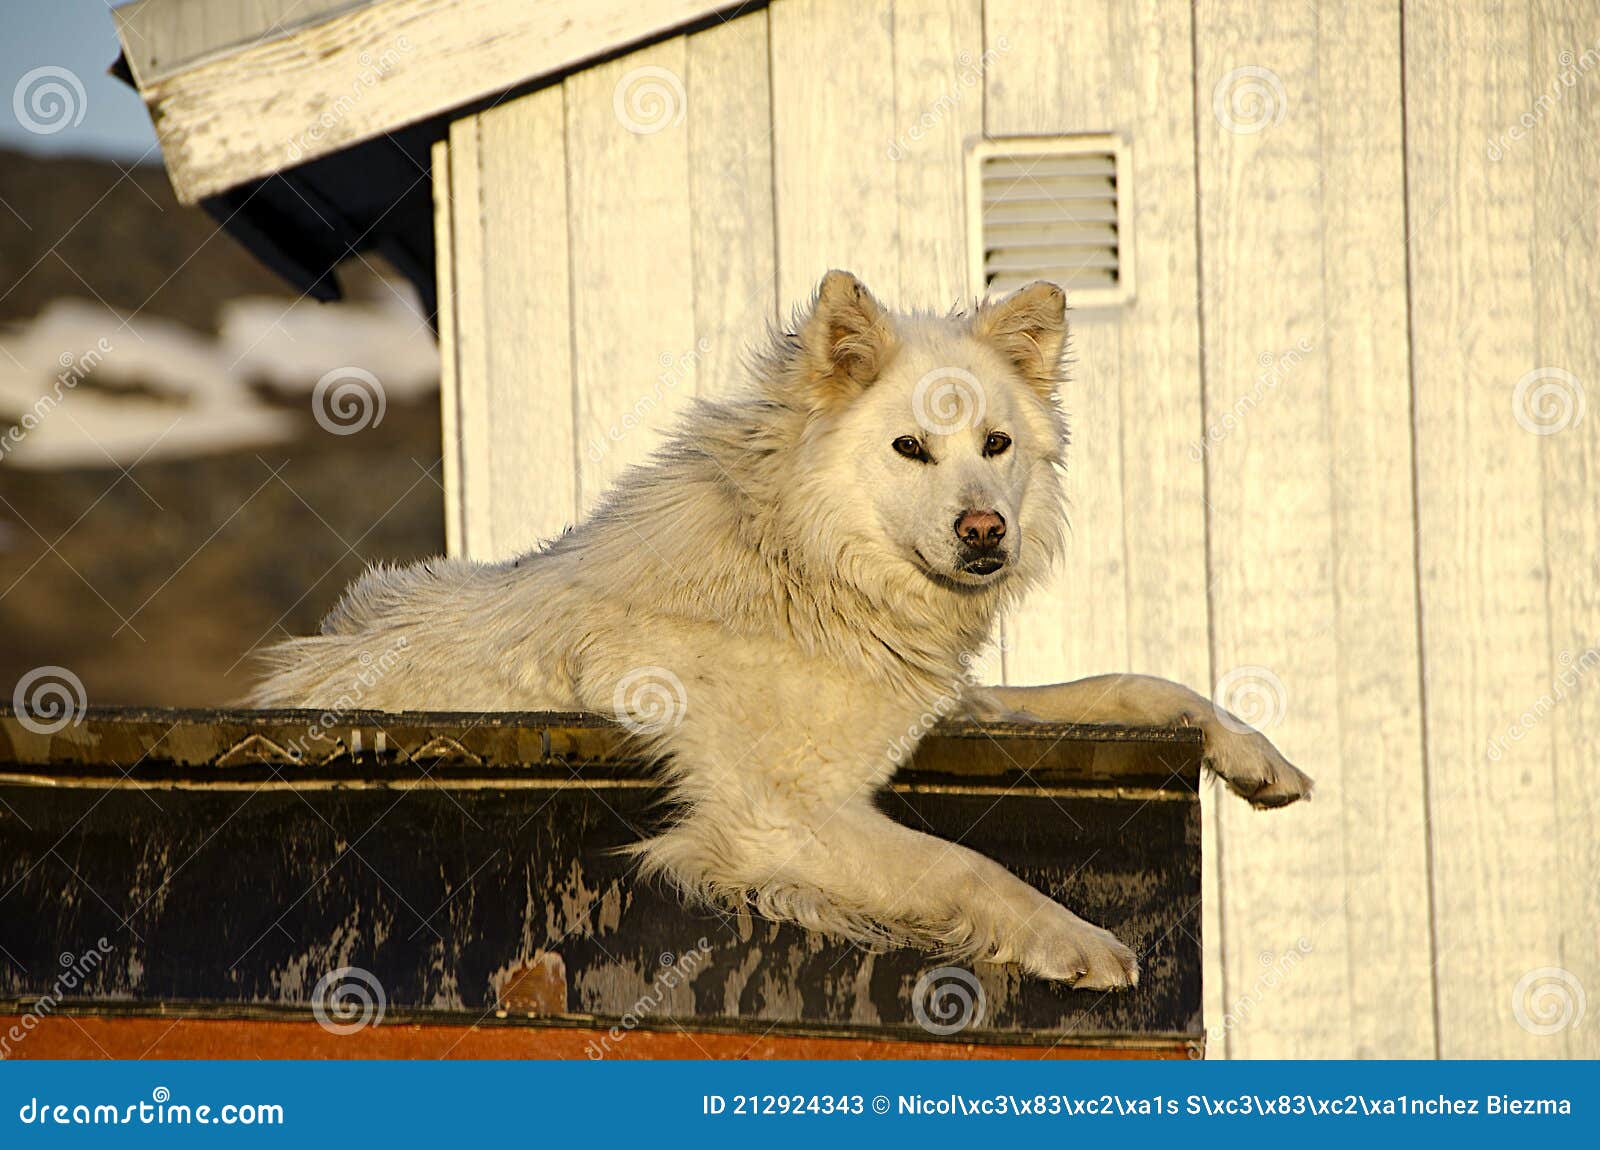 dog resting over a wooden estructure